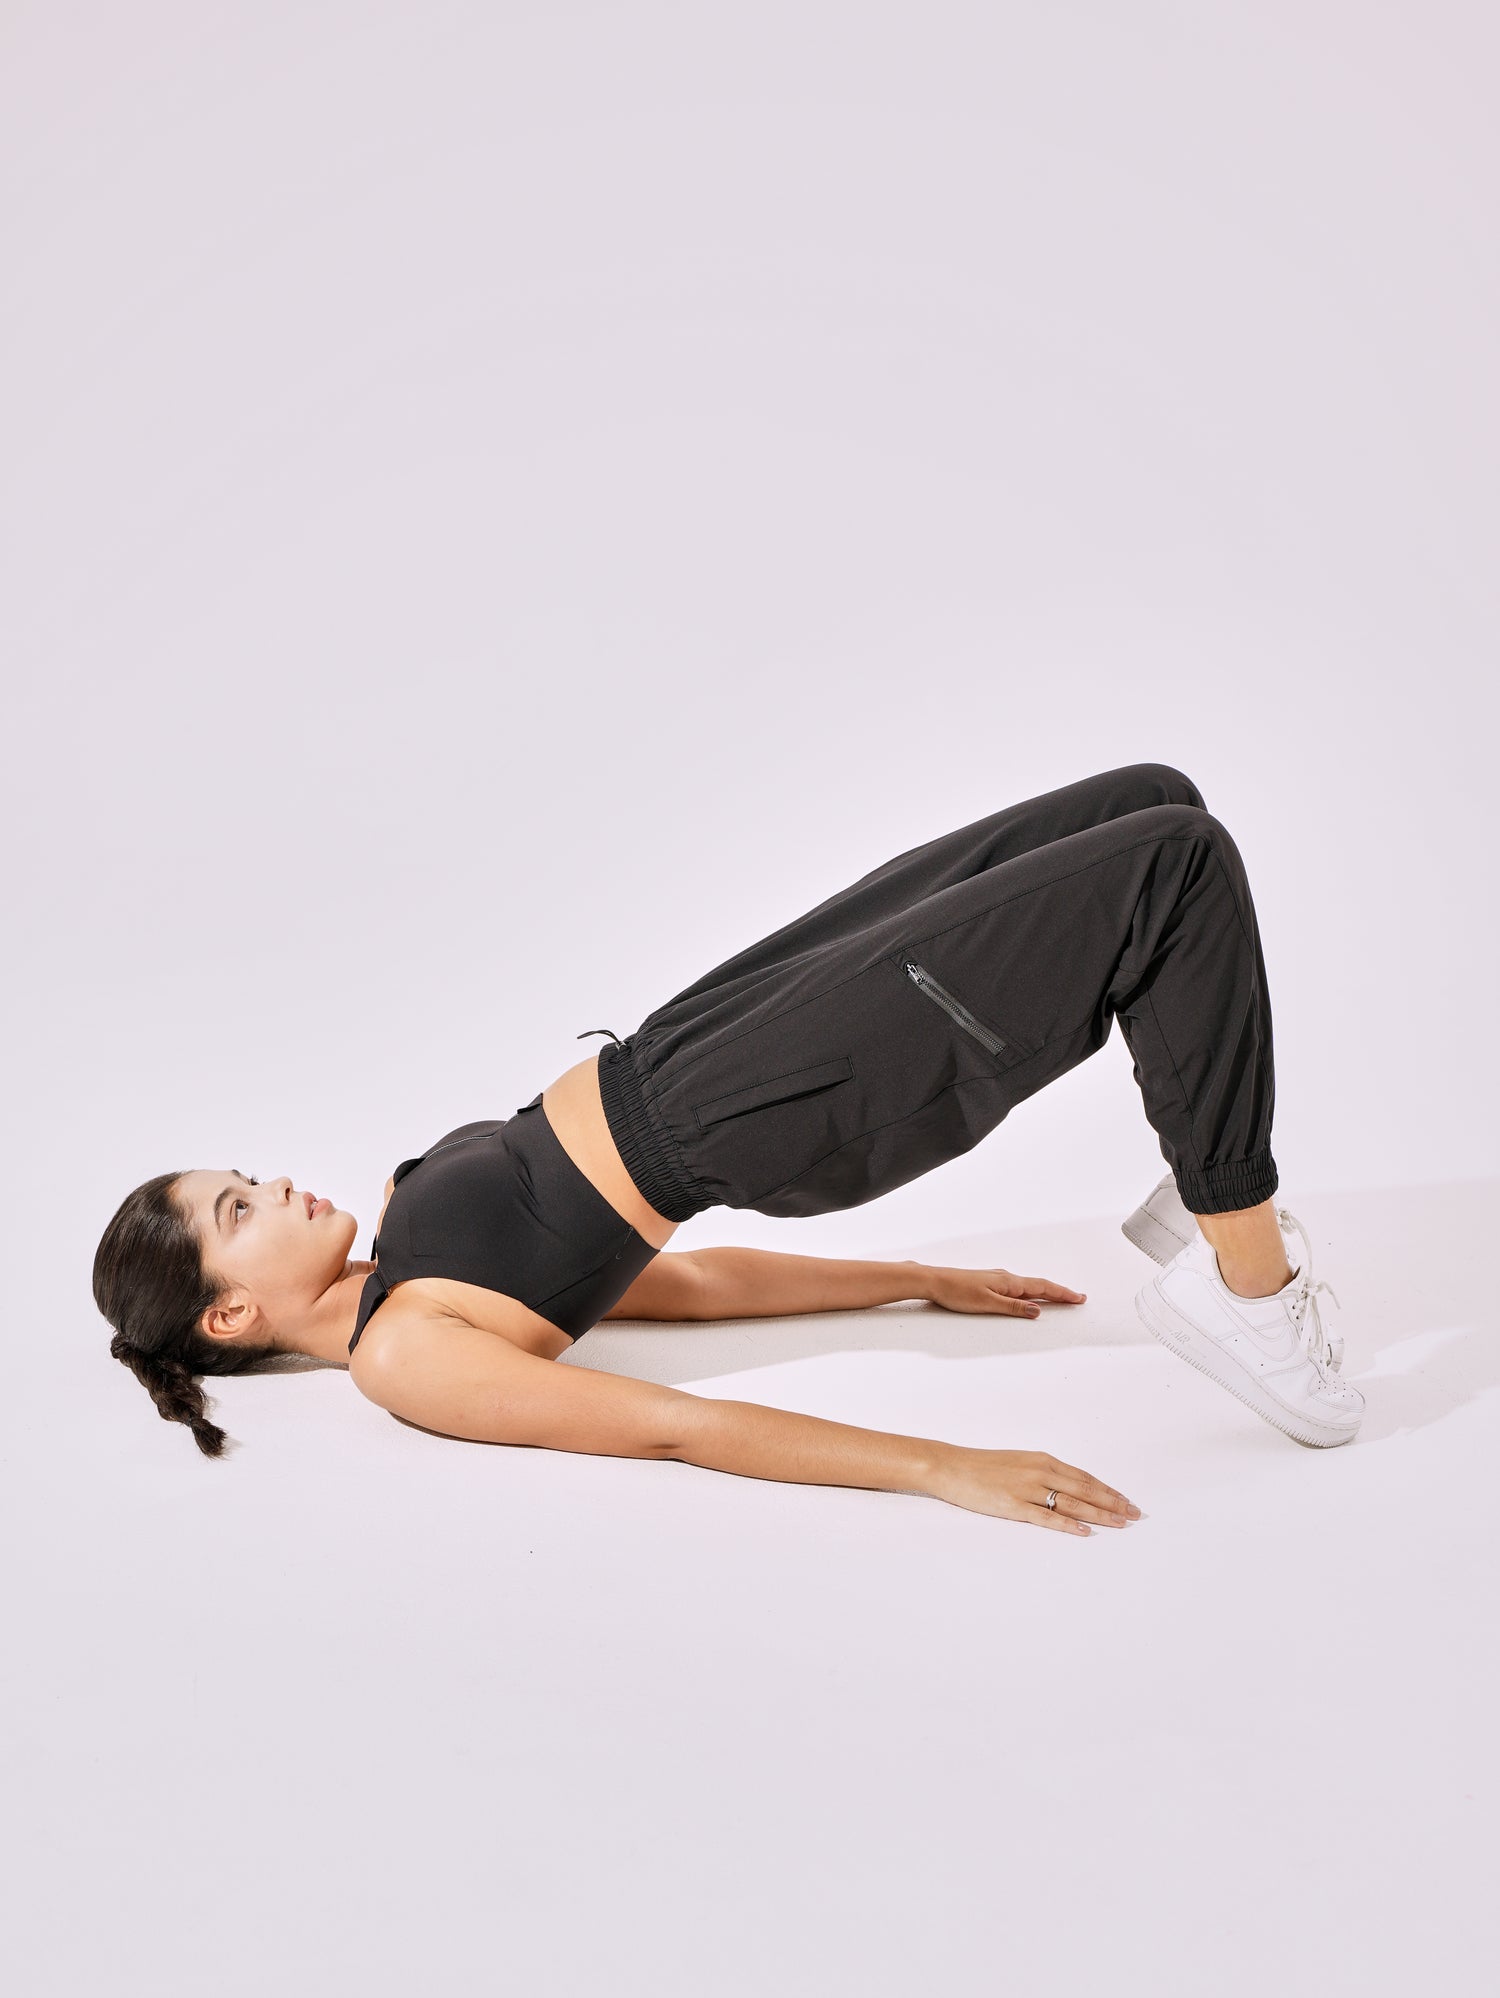 Cooling Anti-Bacterial Explore Joggers With 4 Pockets & Cuffs